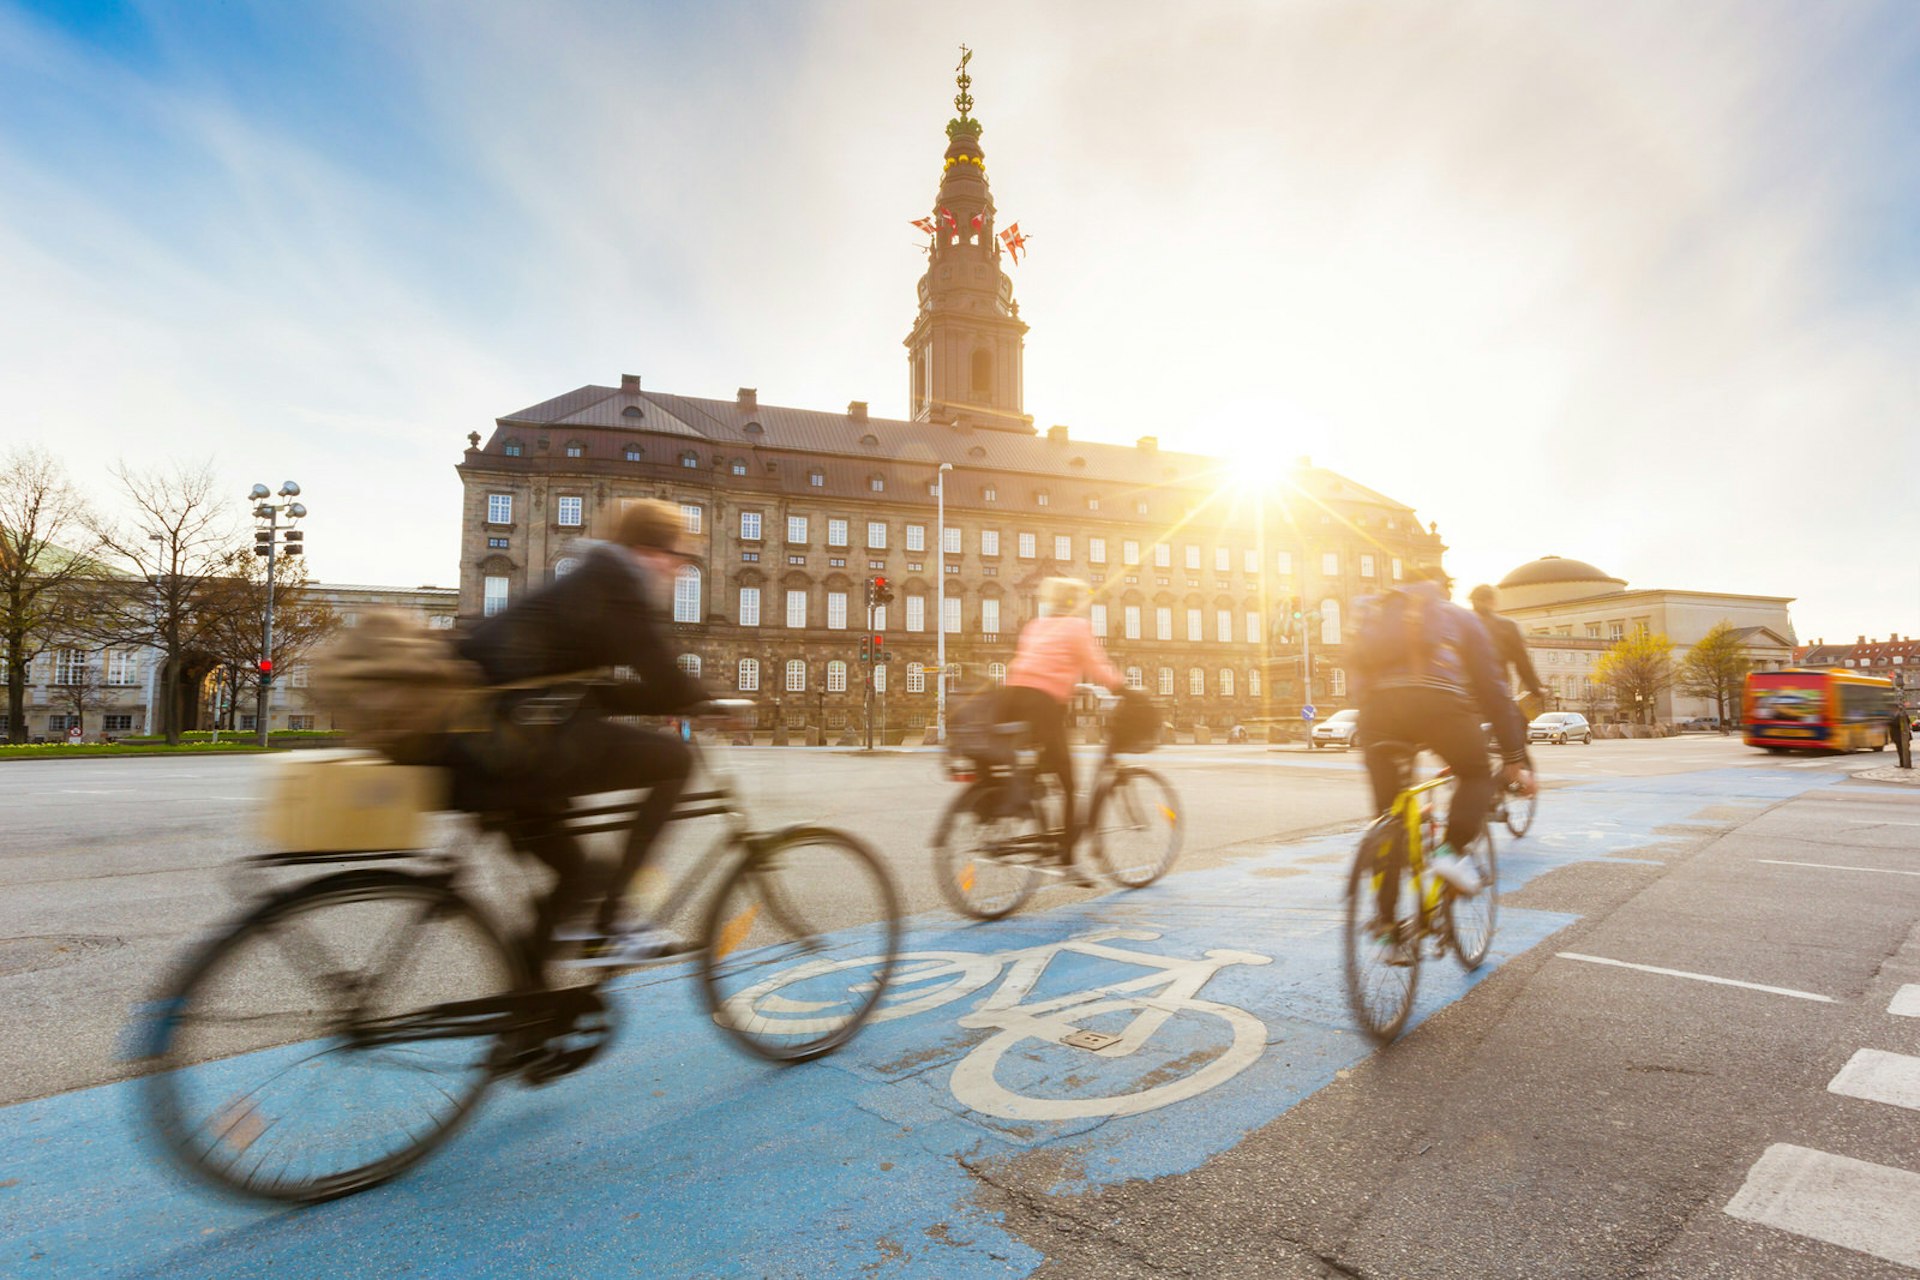 Blurred cyclists ride on a bike lane in Copenhagen, with the sun setting over Christiansborg palace © william87 / Getty Images